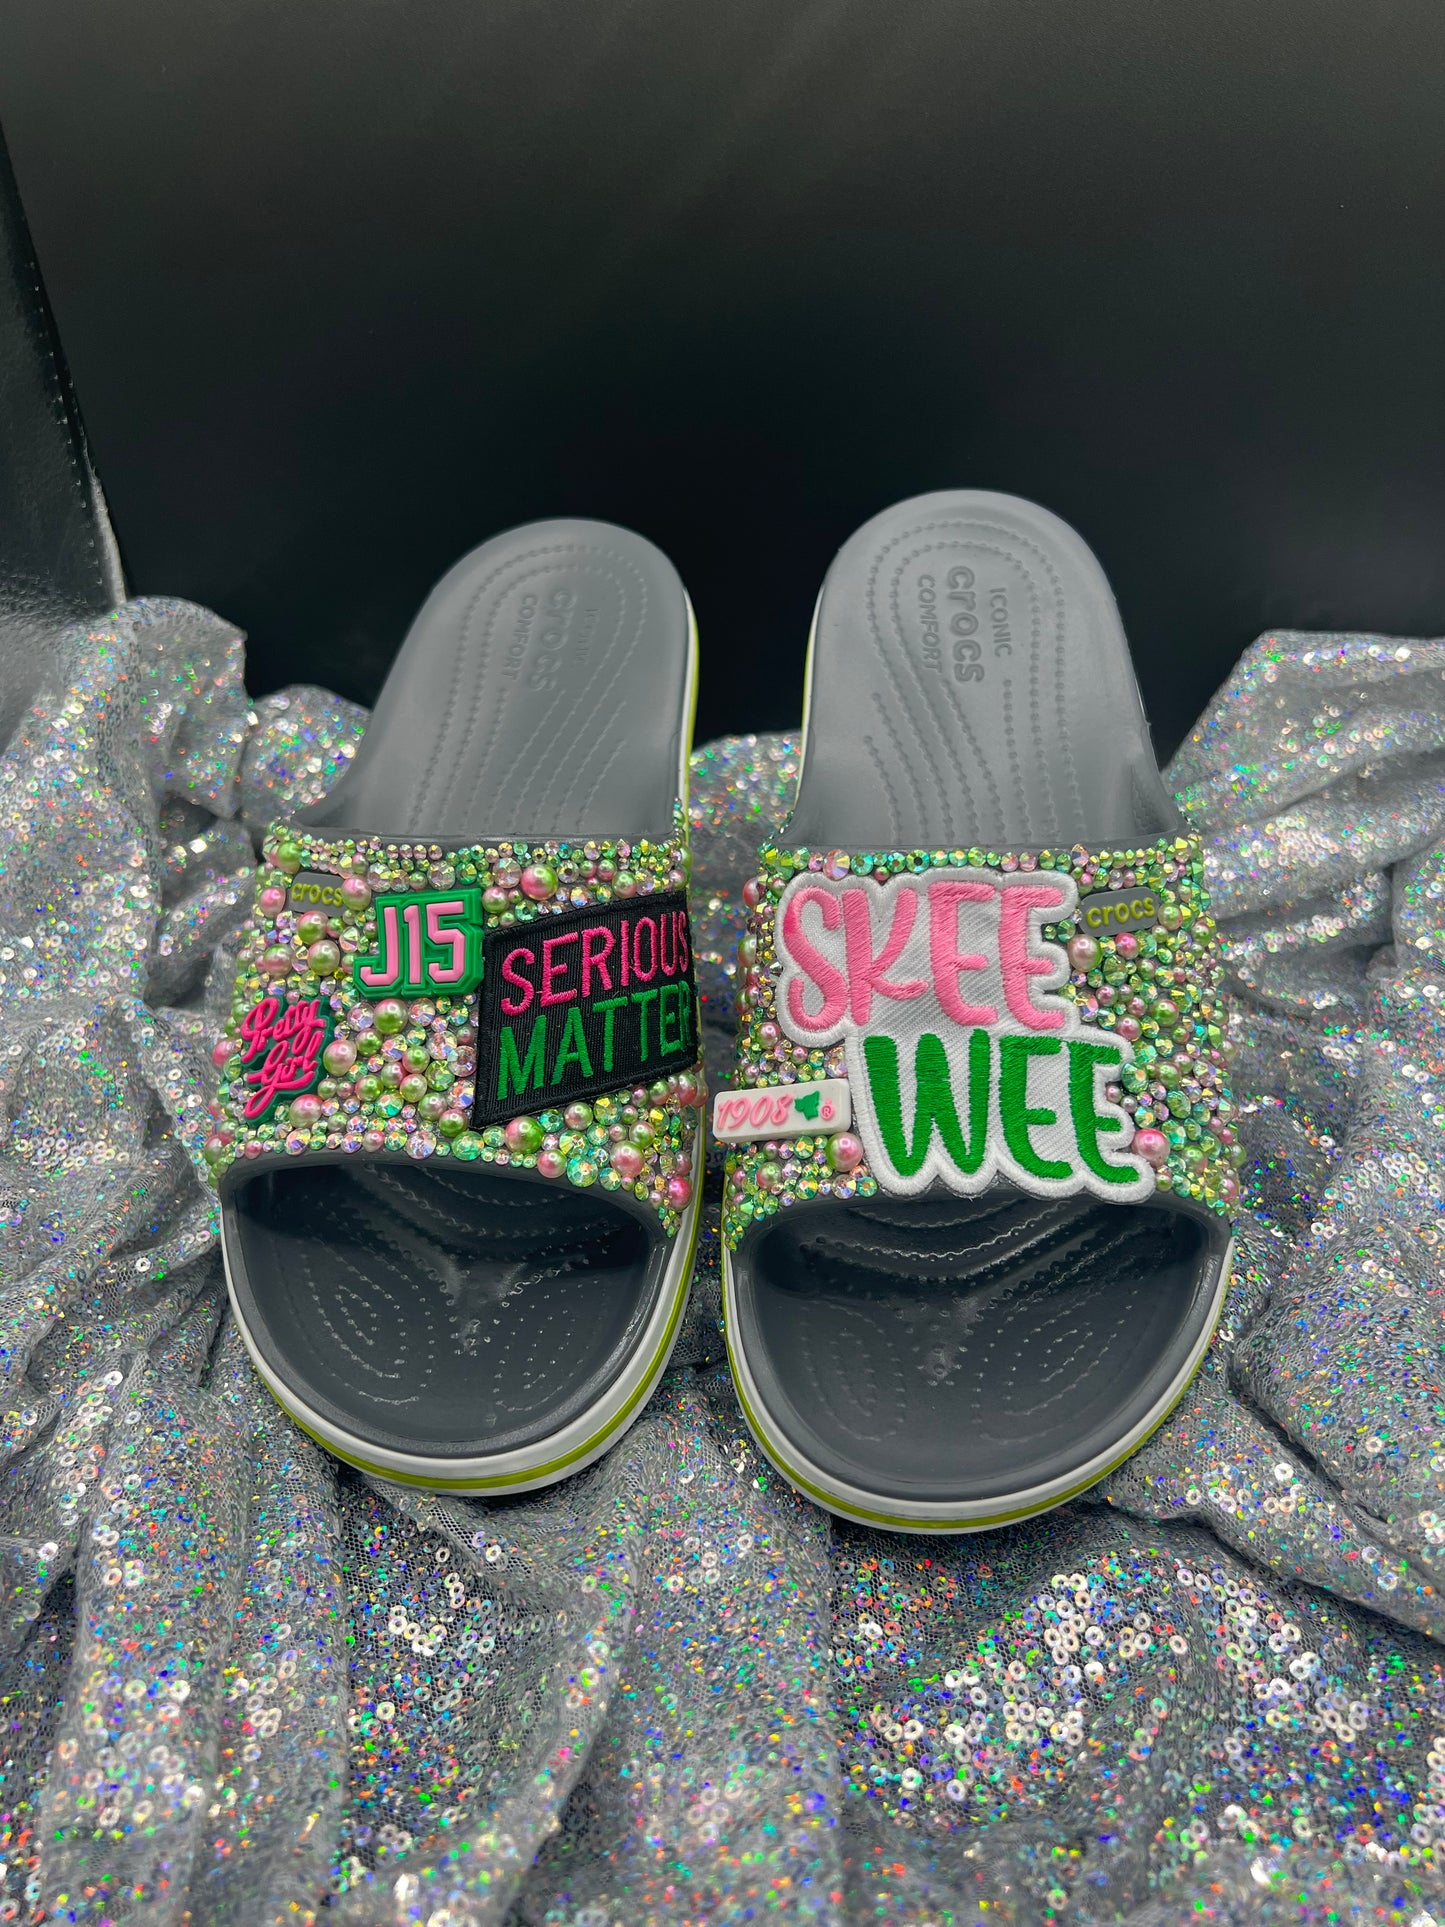 Added to my personal custom slides collection ✓😍😜 #Crocs #blingbling